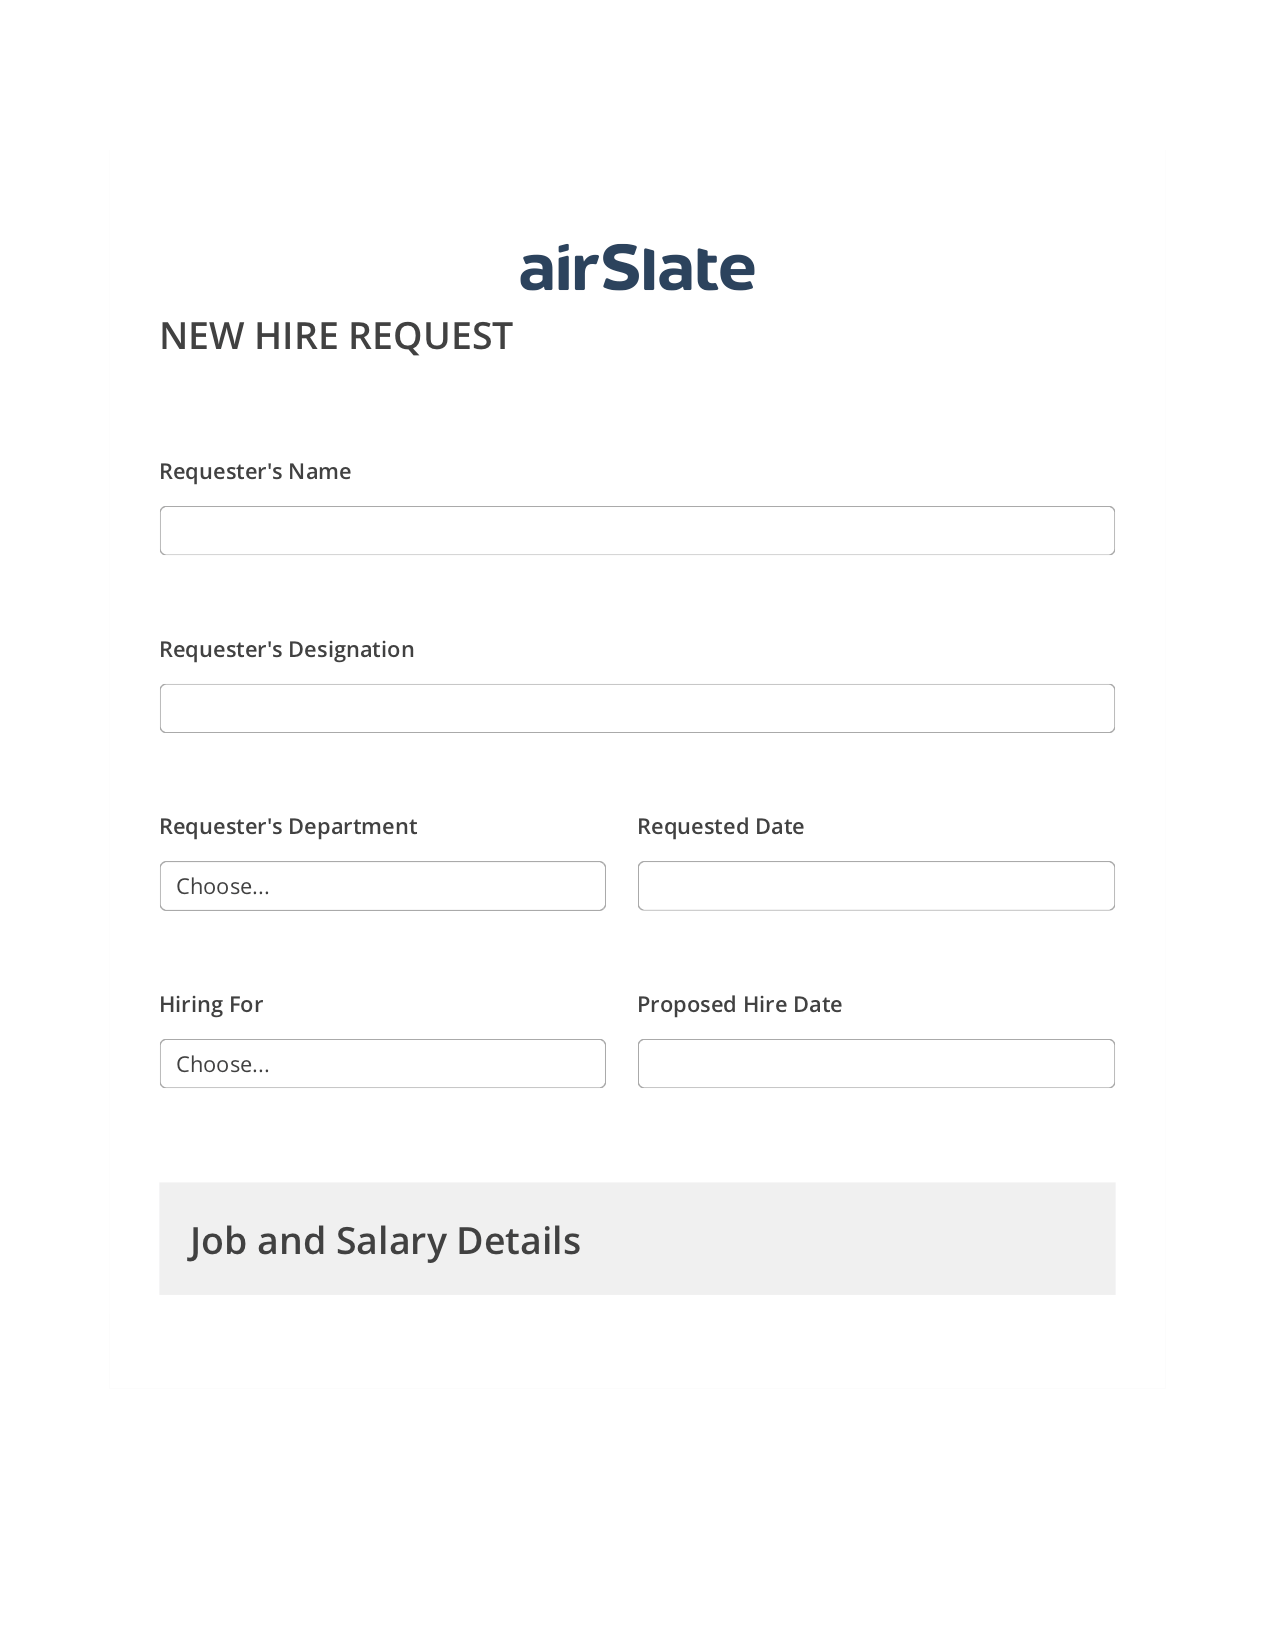 Multirole Hiring Request Workflow Pre-fill Dropdowns from Airtable, Remove Slate Bot, Export to Salesforce Record Bot